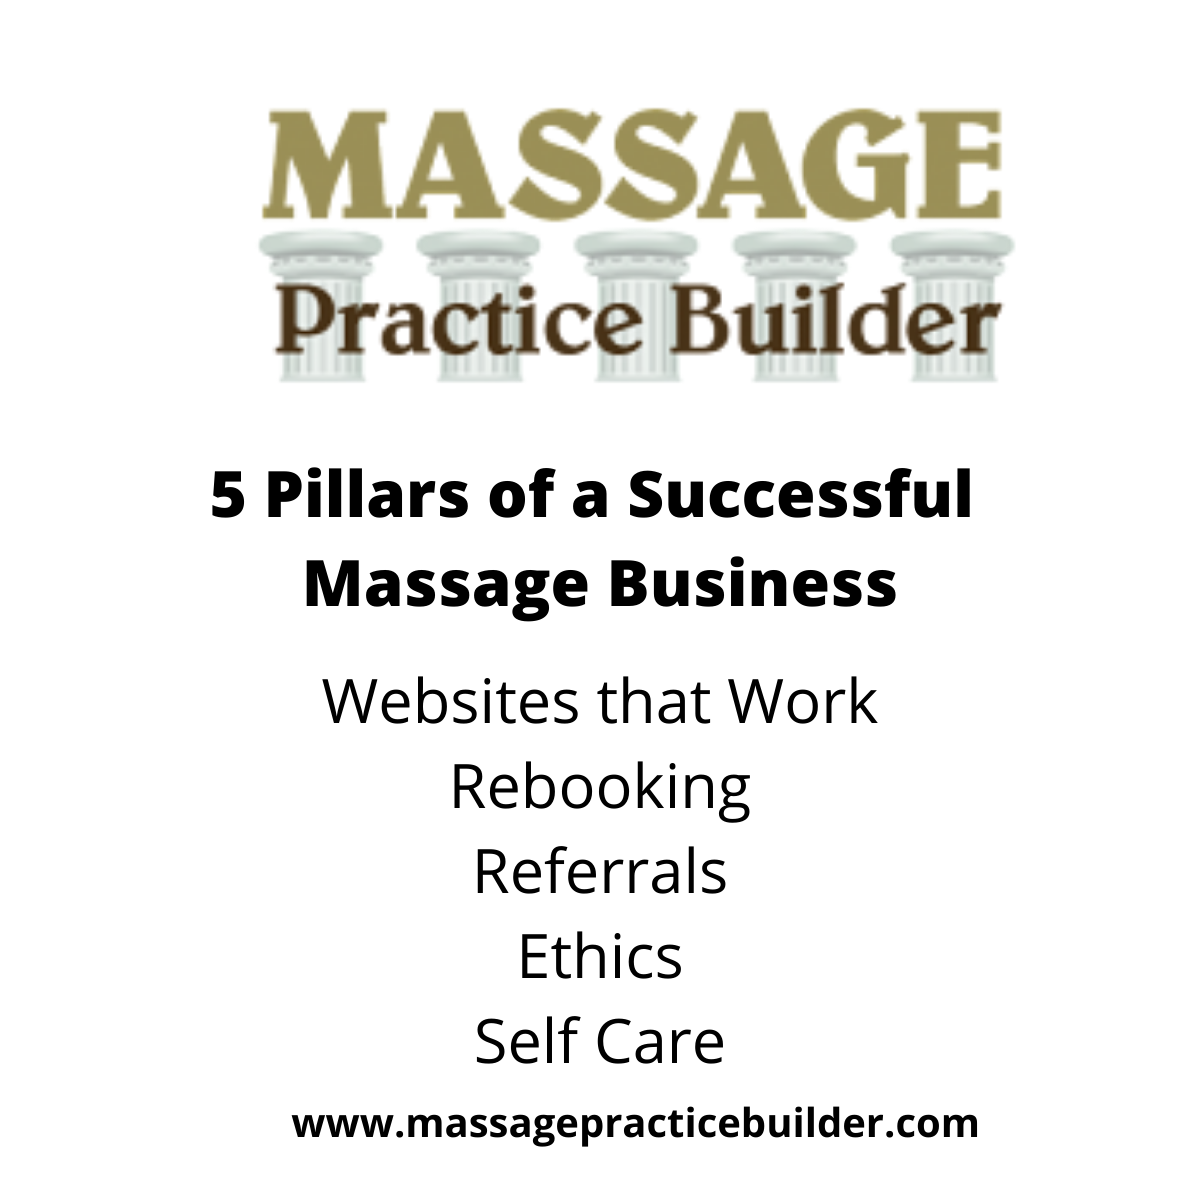 Massage Practice Builder Start And Run A Successful Massage Business You Know How To Massage